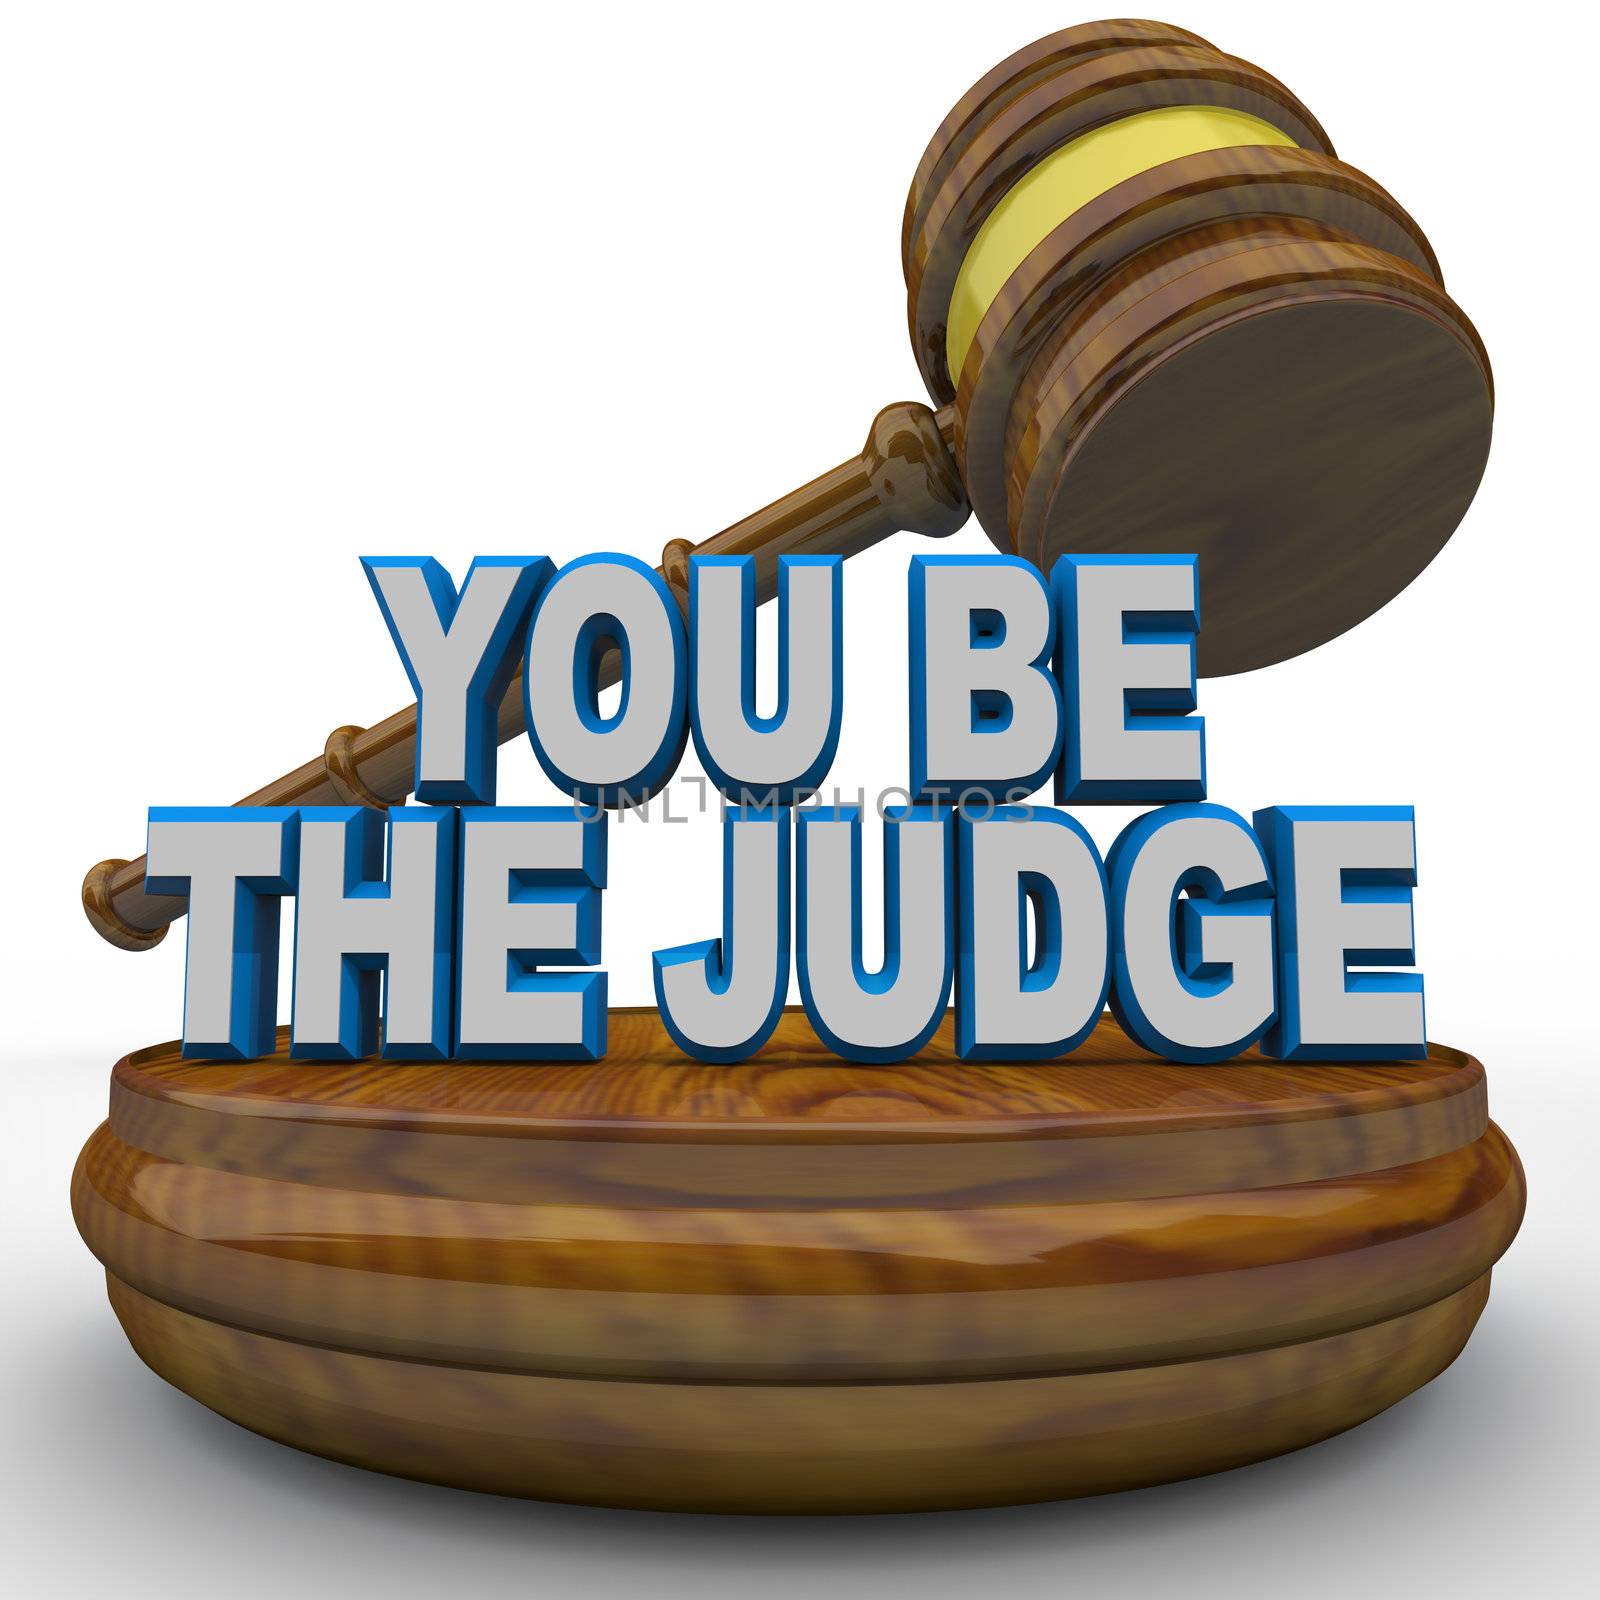 You Be the Judge - Using Gavel to Make Decision by iQoncept